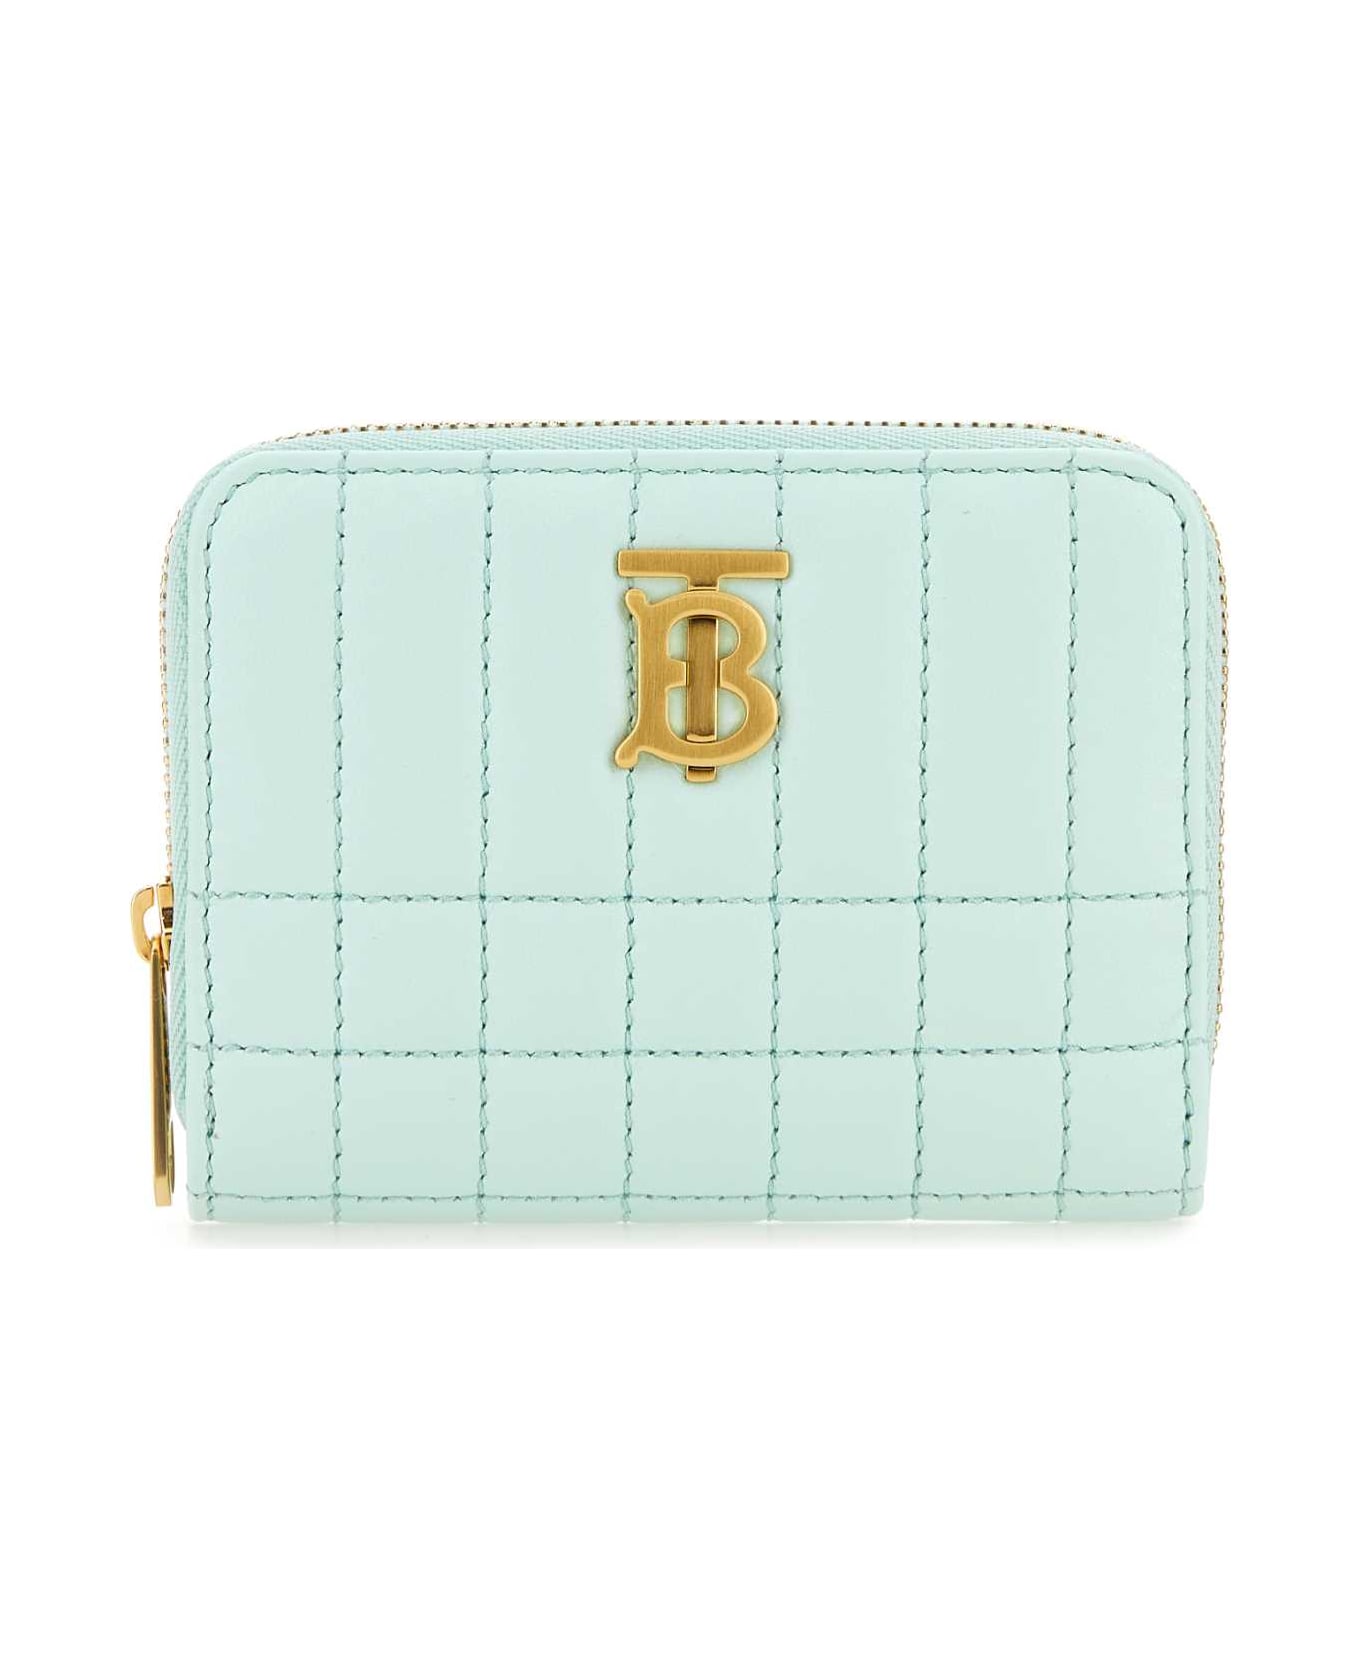 Burberry Pastel Light-blue Nappa Leather Lola Wallet - COOLMINT